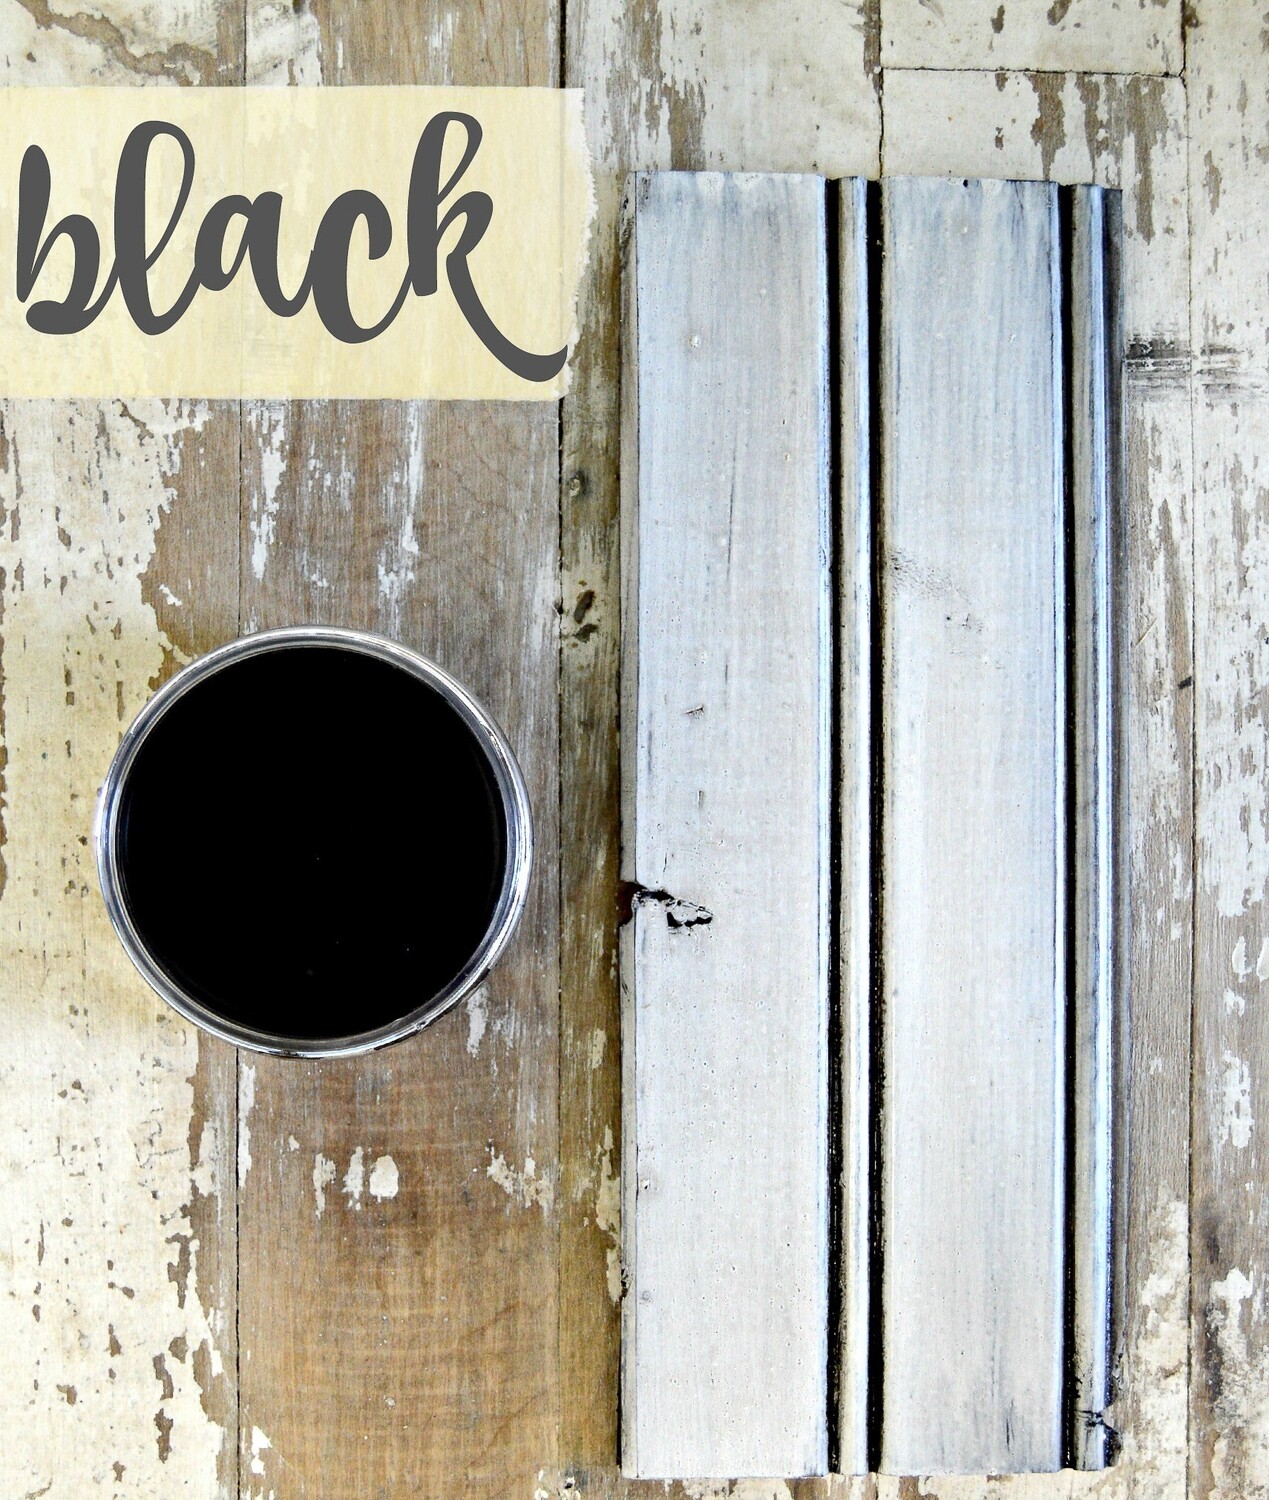 Black Beeswax Furniture Wax by Sweet Pickins